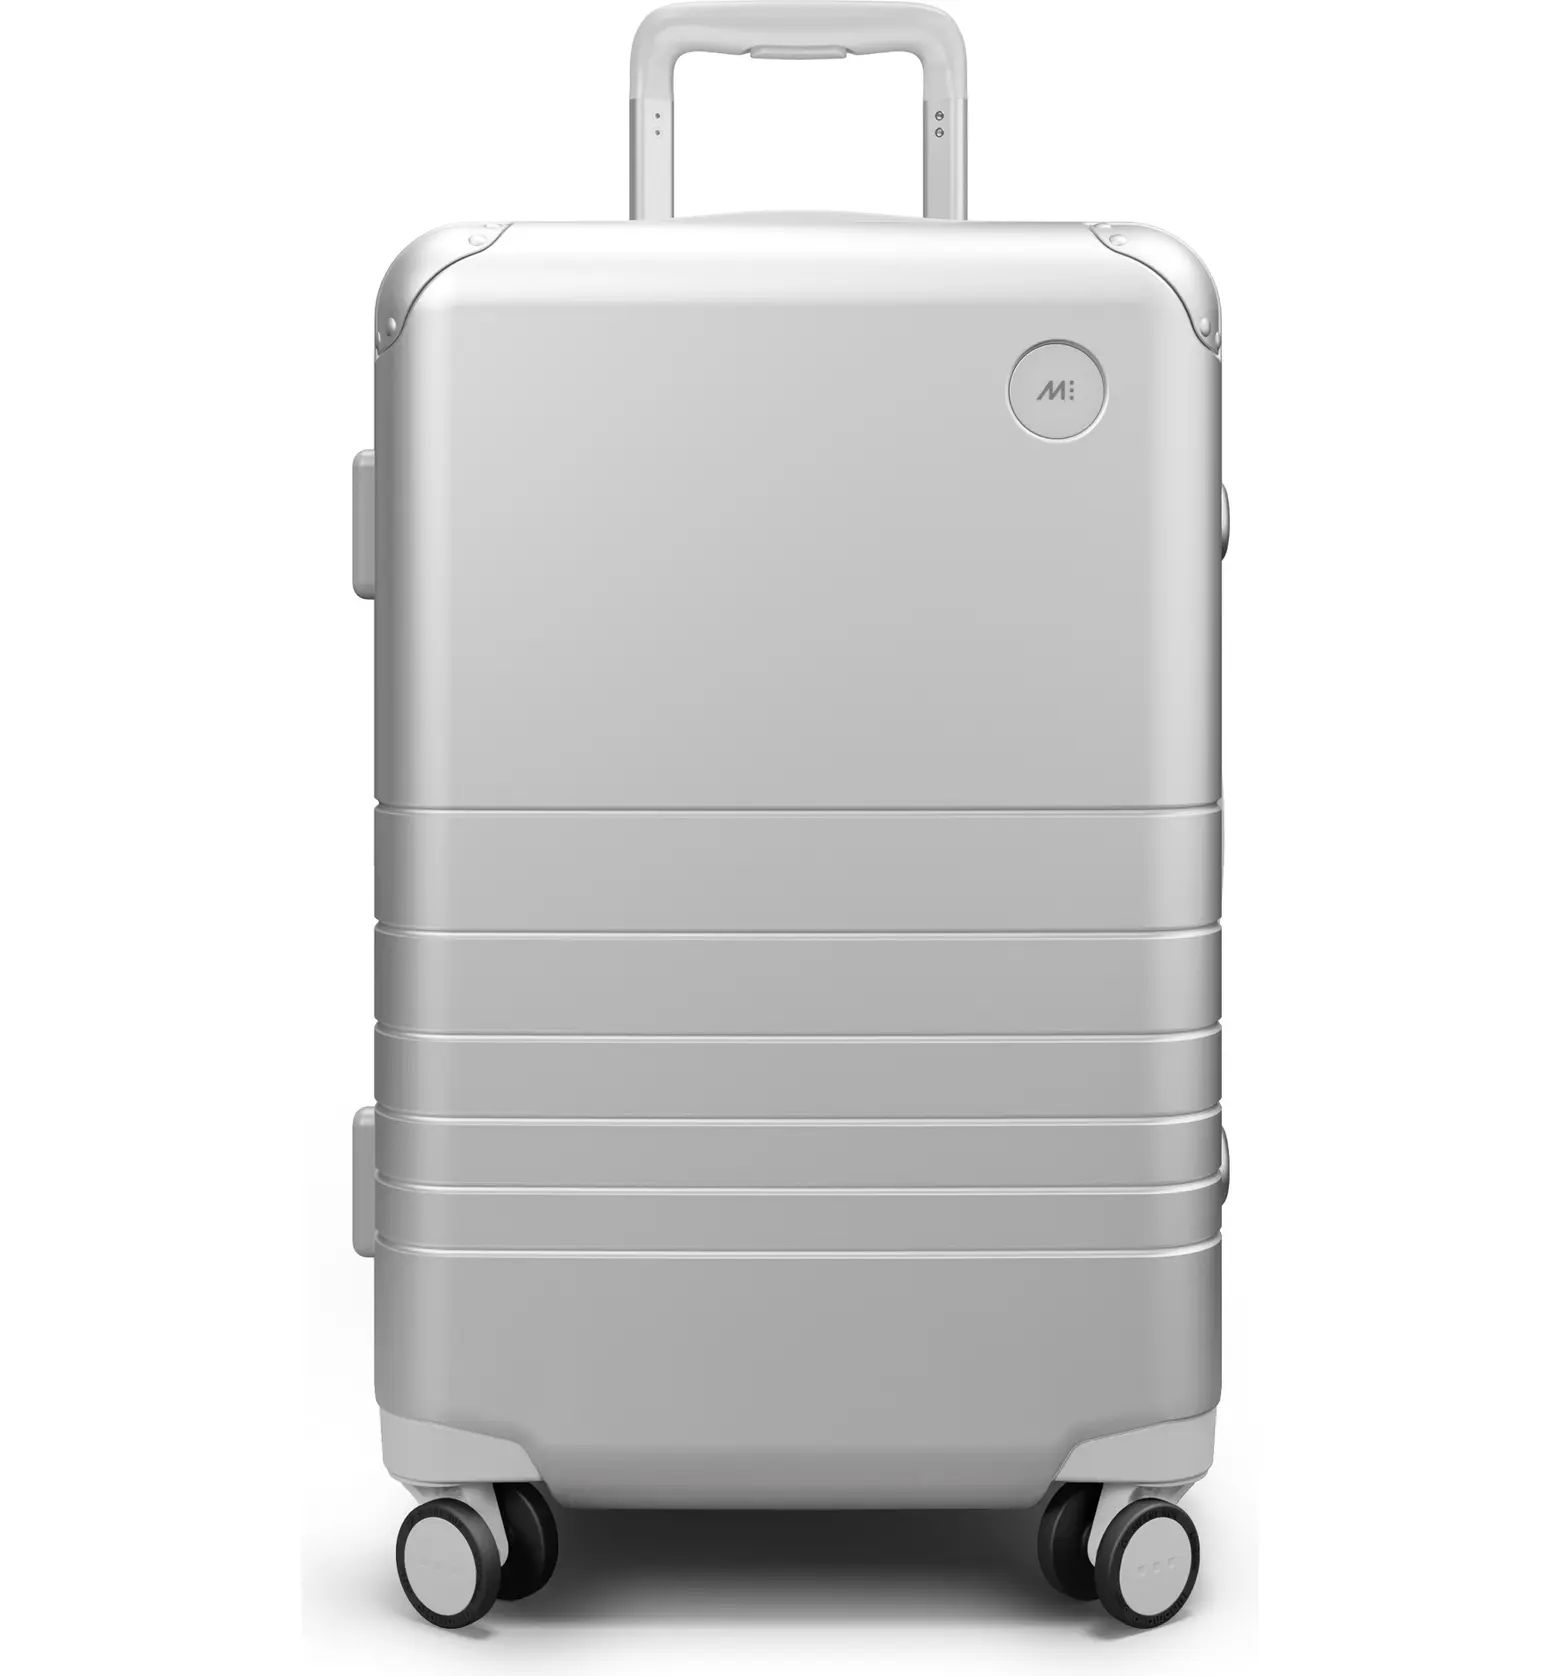 23-Inch Hybrid Carry-On Plus Spinner Luggage | Nordstrom